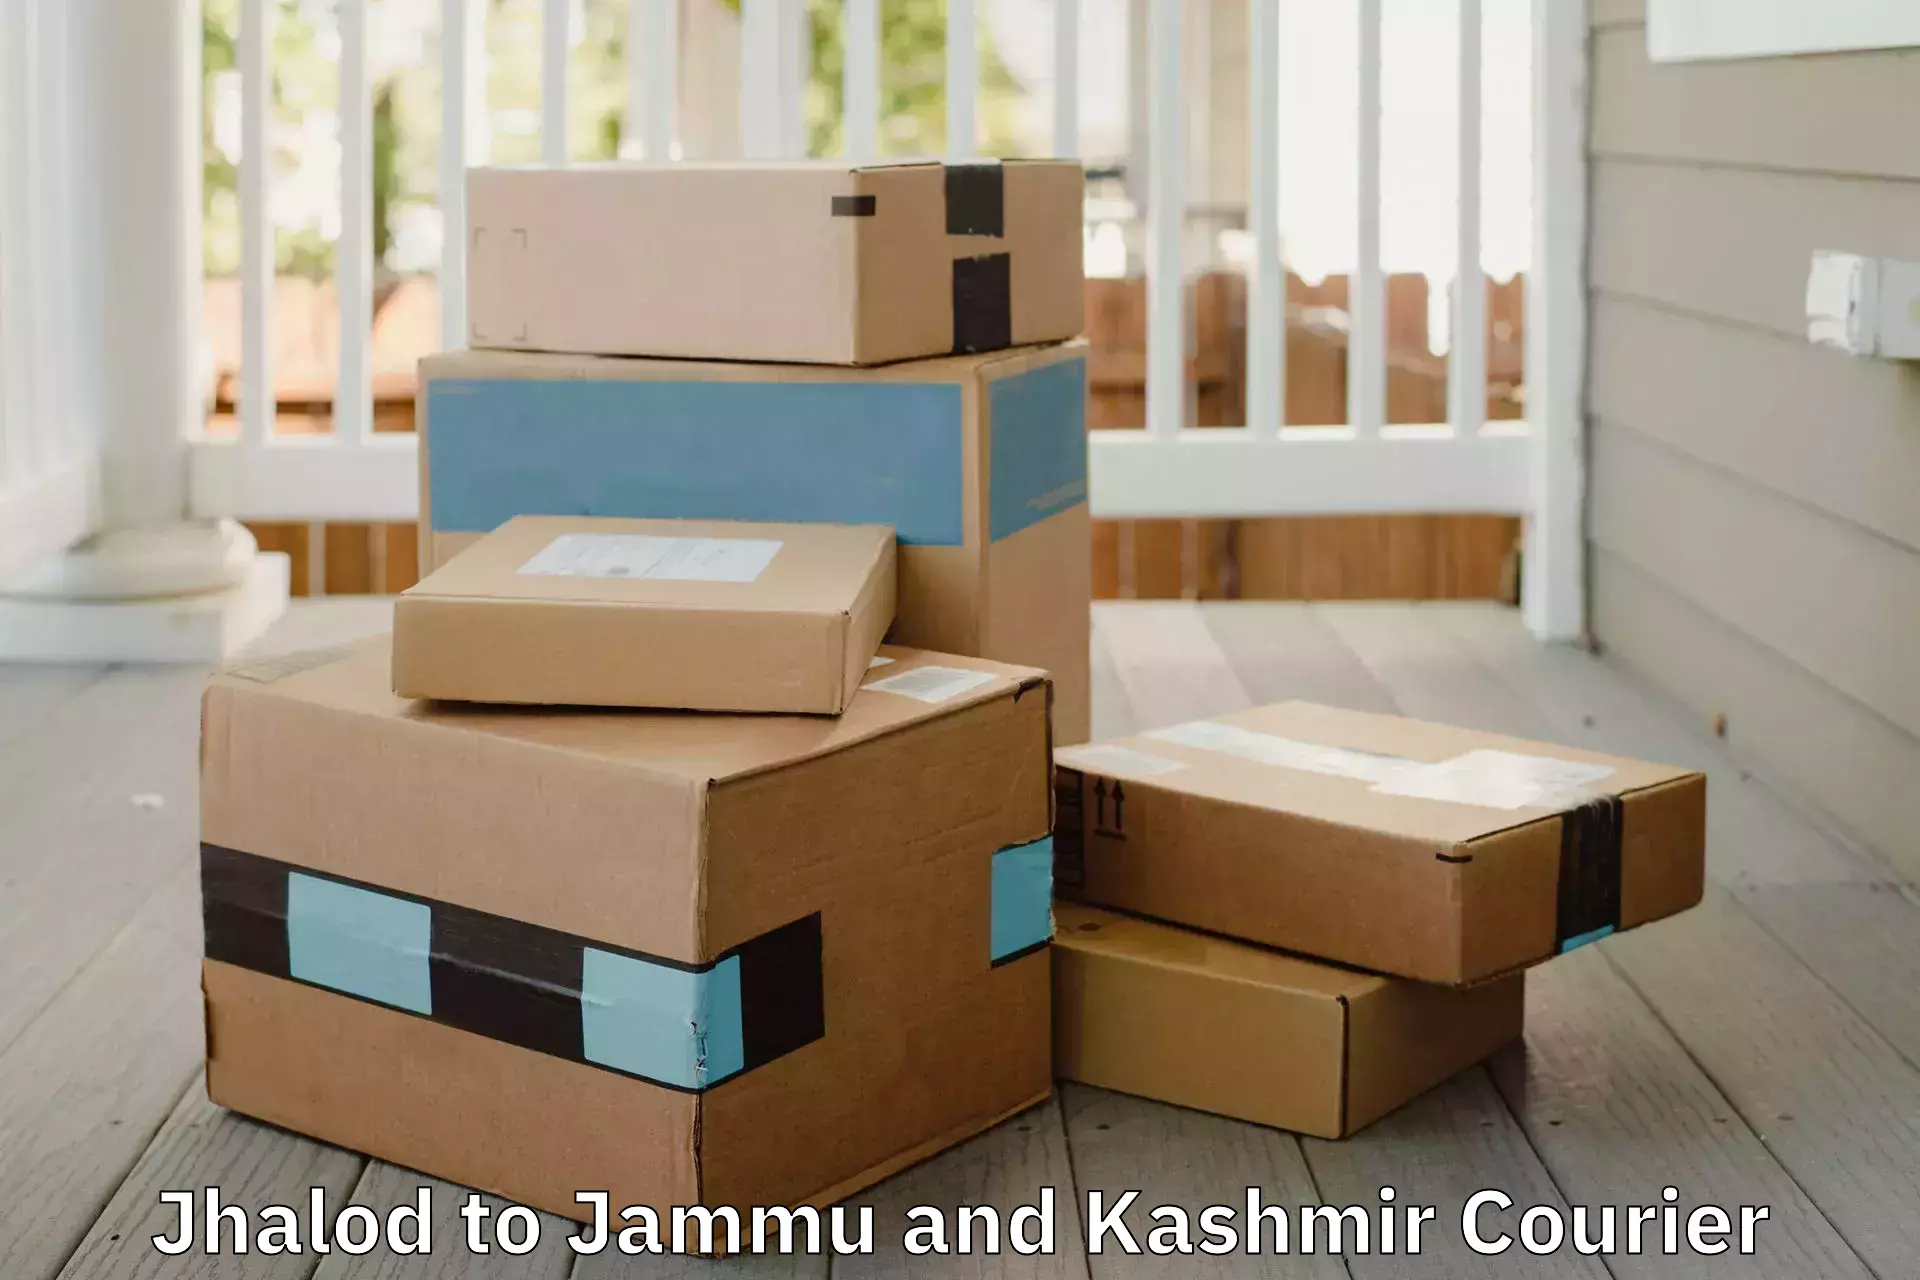 Household moving experts Jhalod to Jammu